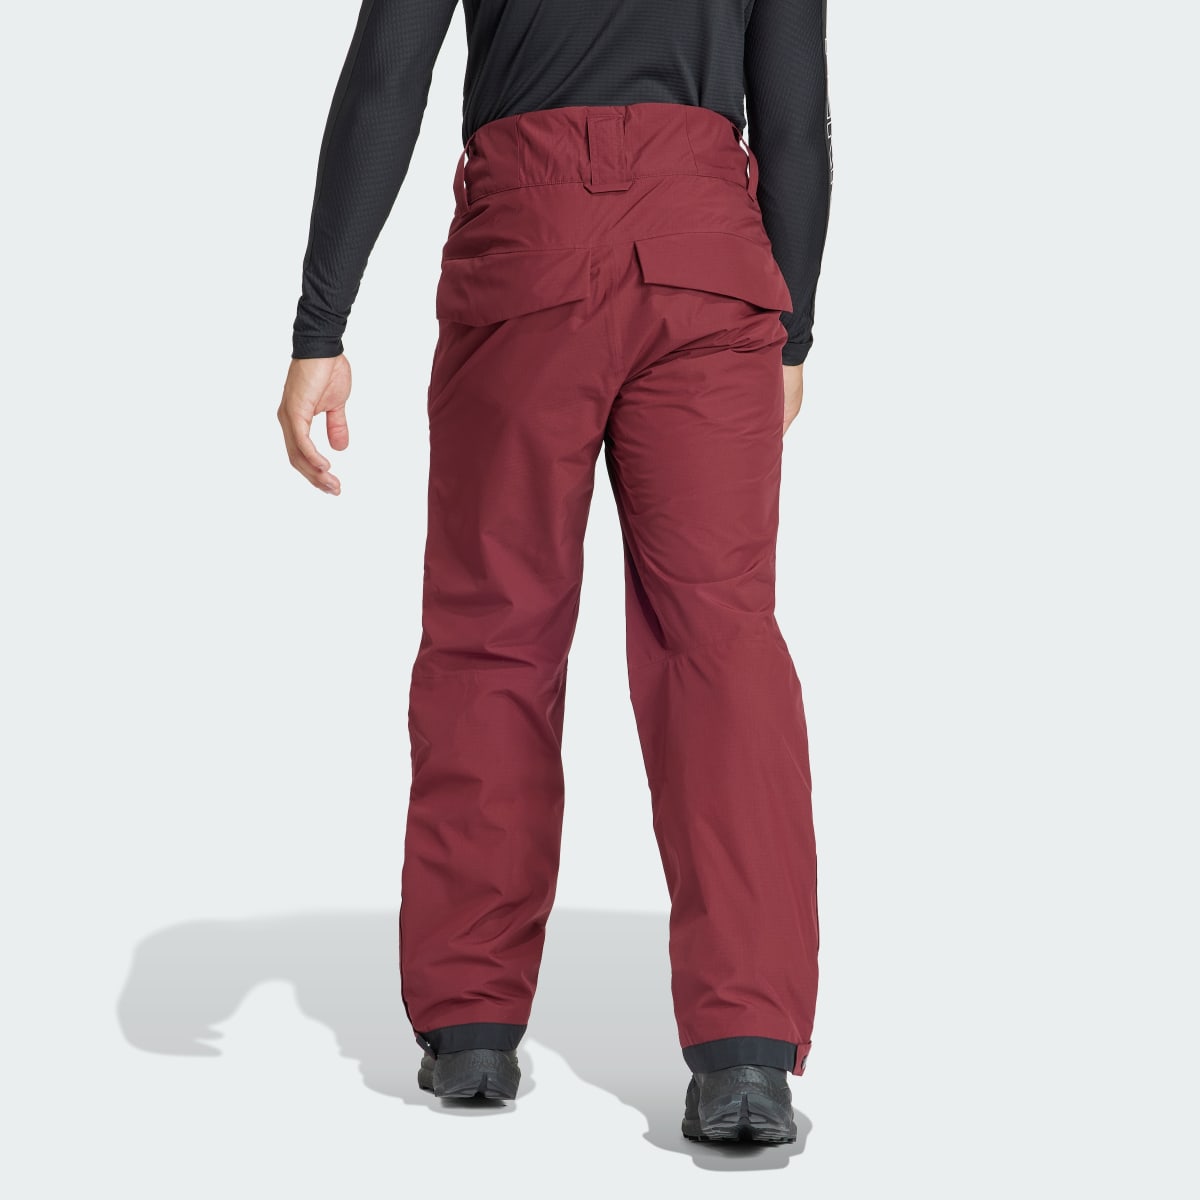 Women's Boundary Line Insulated Pants